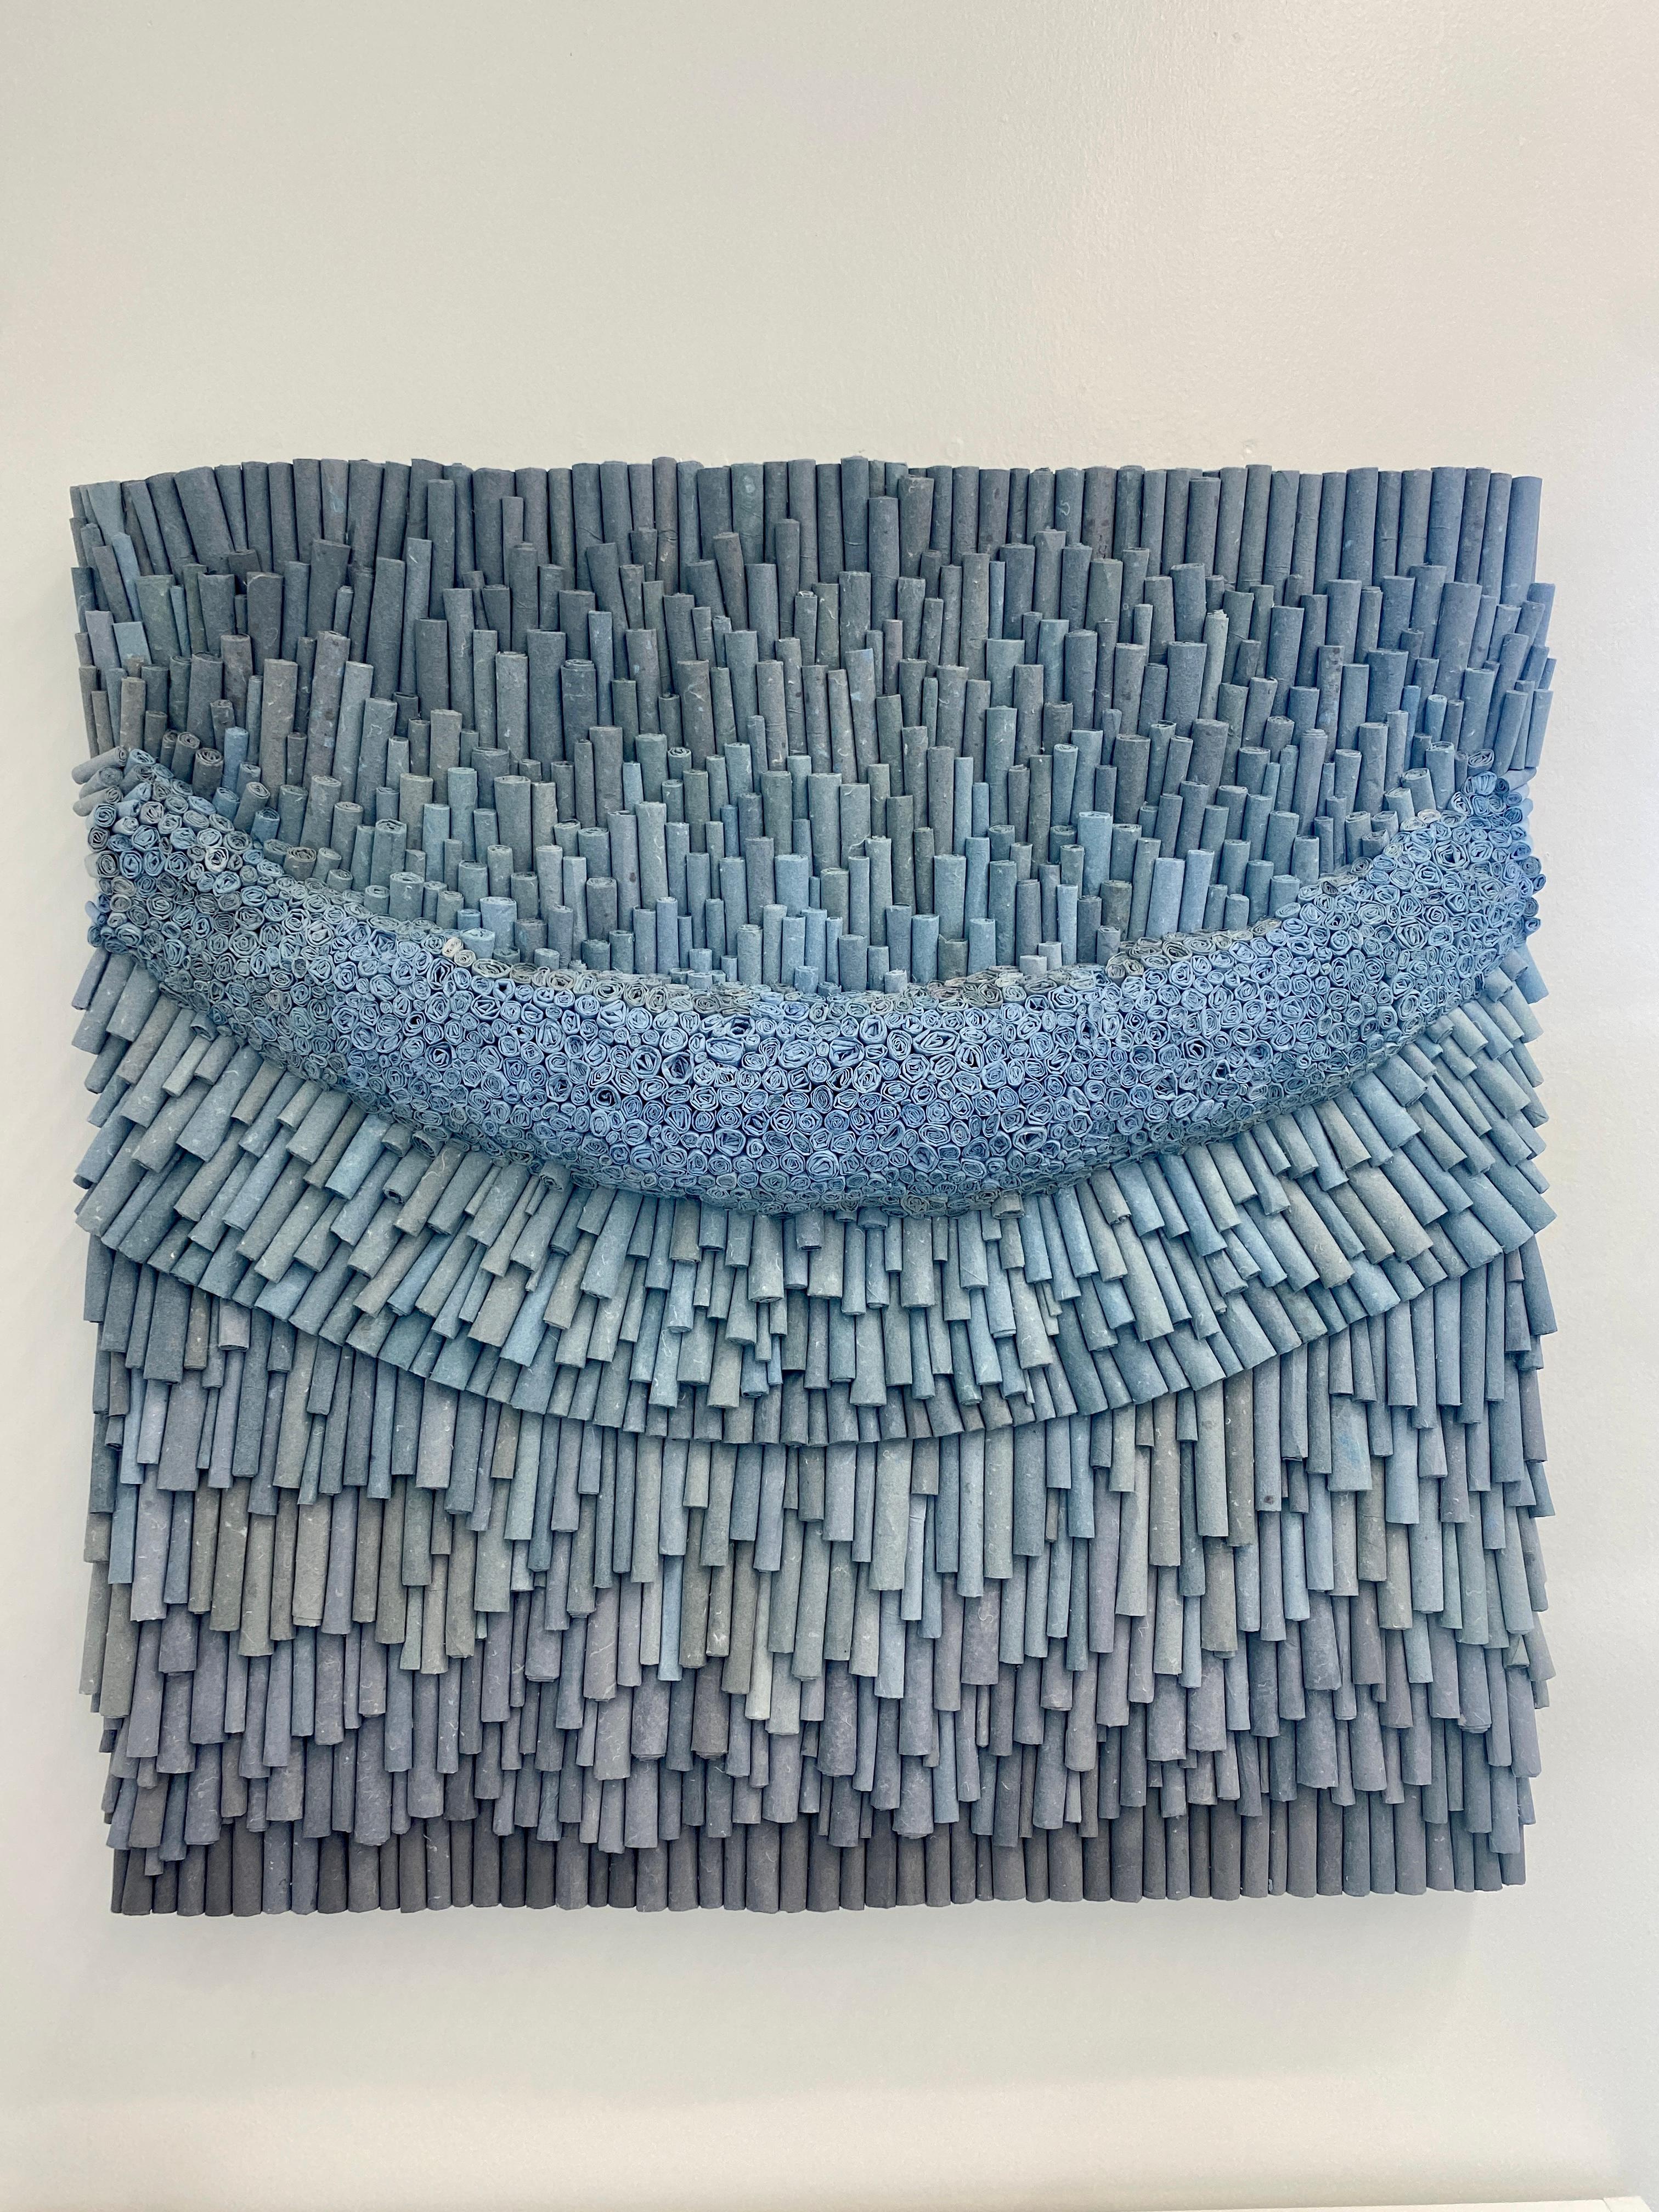 Denim, Contemporary Rolled Paper Painting, Abstract, Sculptural, Minimalism - Sculpture by Jenn Hassin